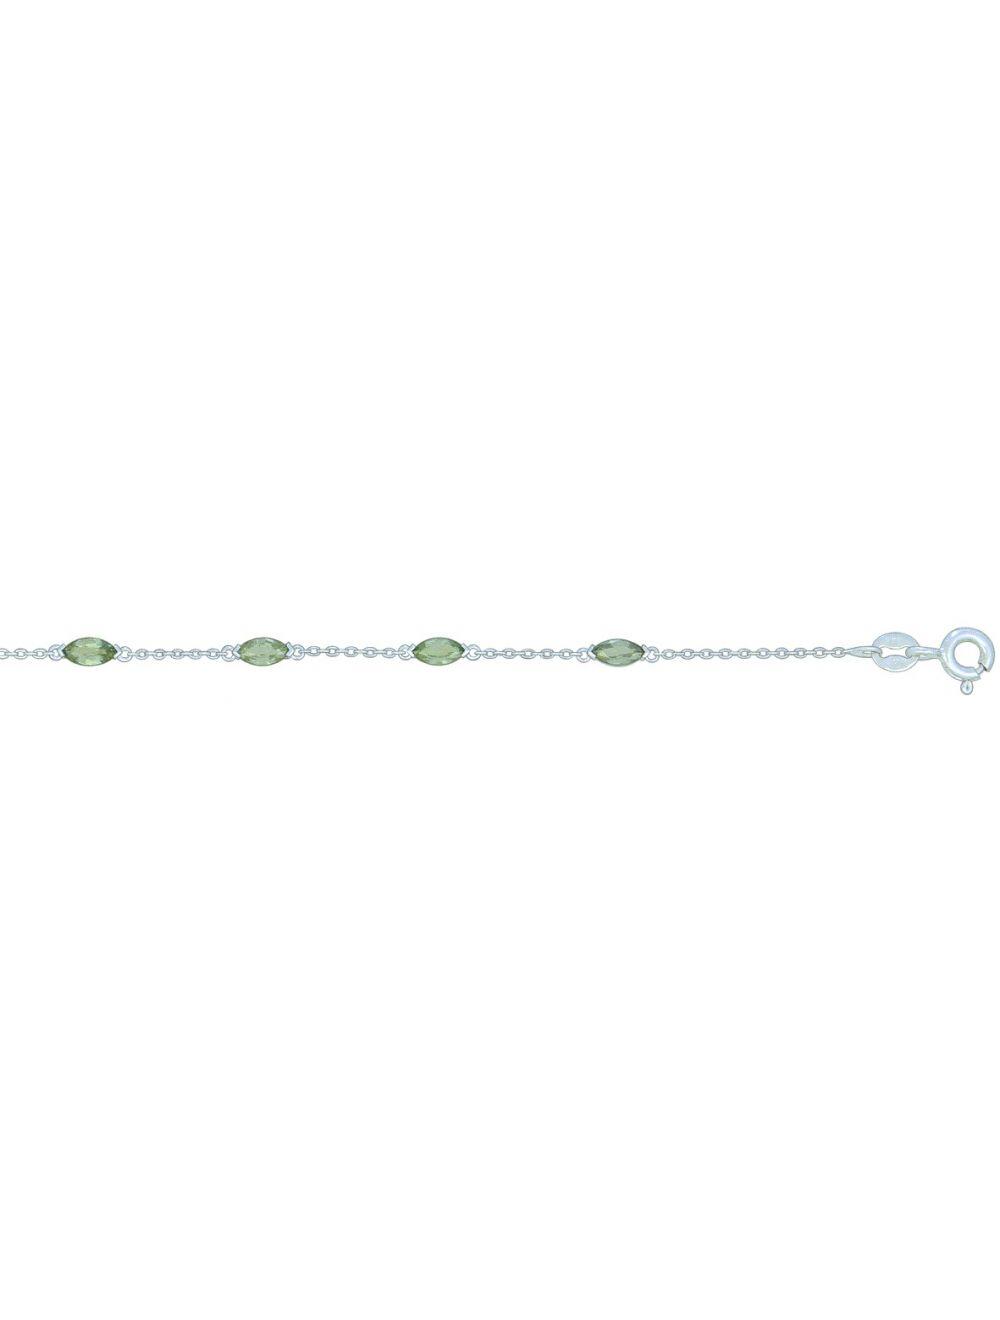 # 18cm white gold bracelet with 1.54ct green sapphire